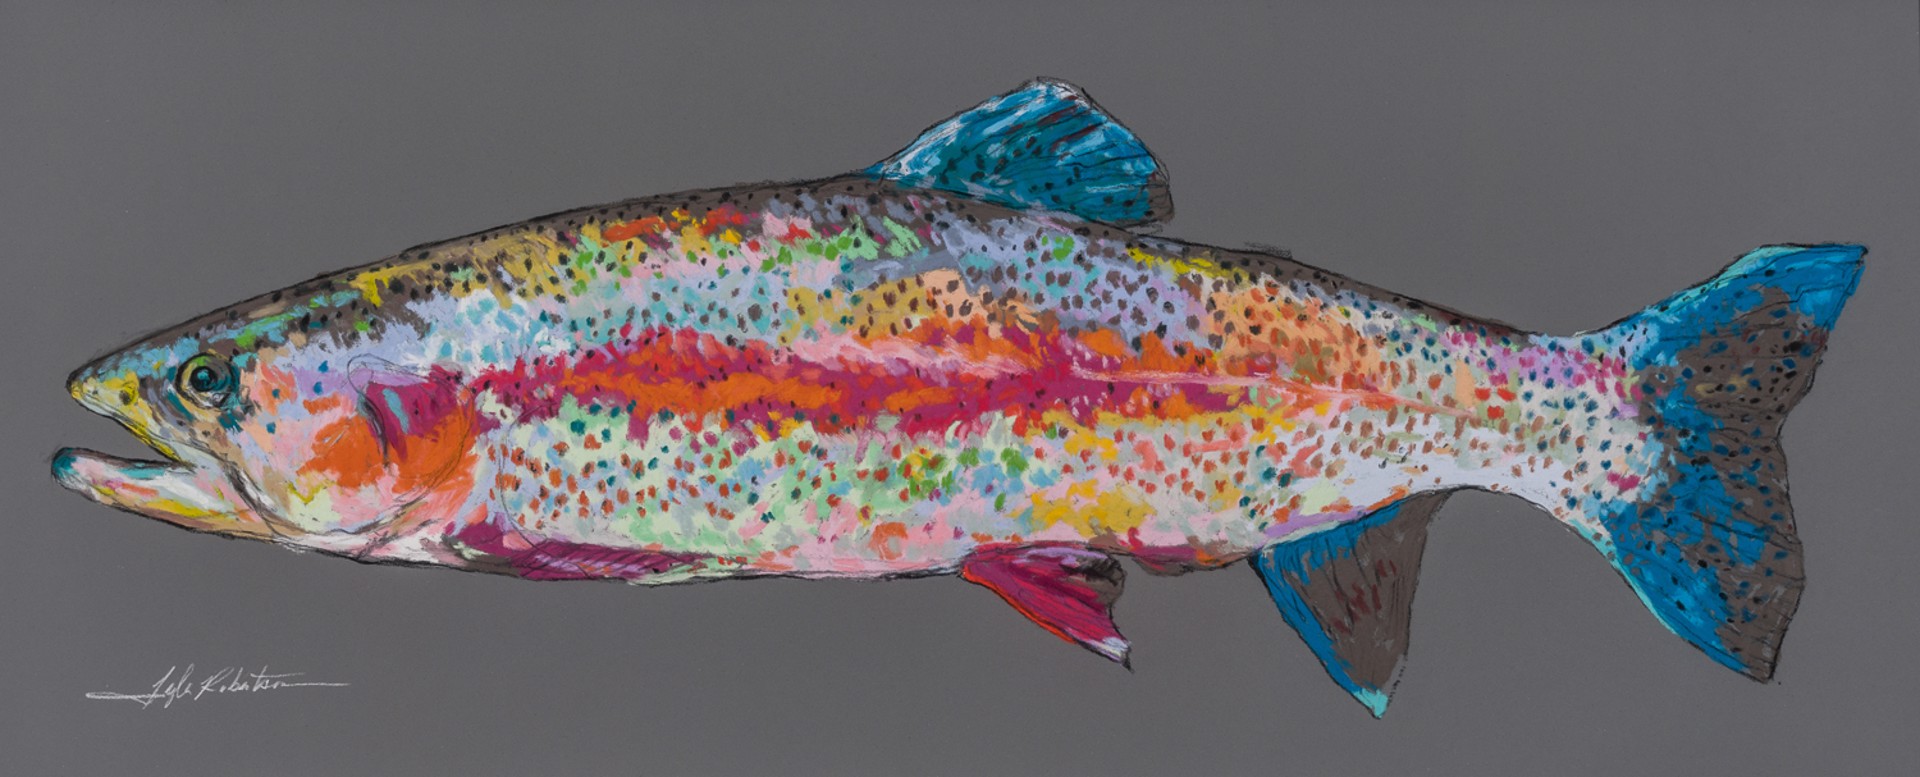 ‘RAINBOW TROUT’ & ‘RED DRUM’ (a pair) by Tyler Robertson